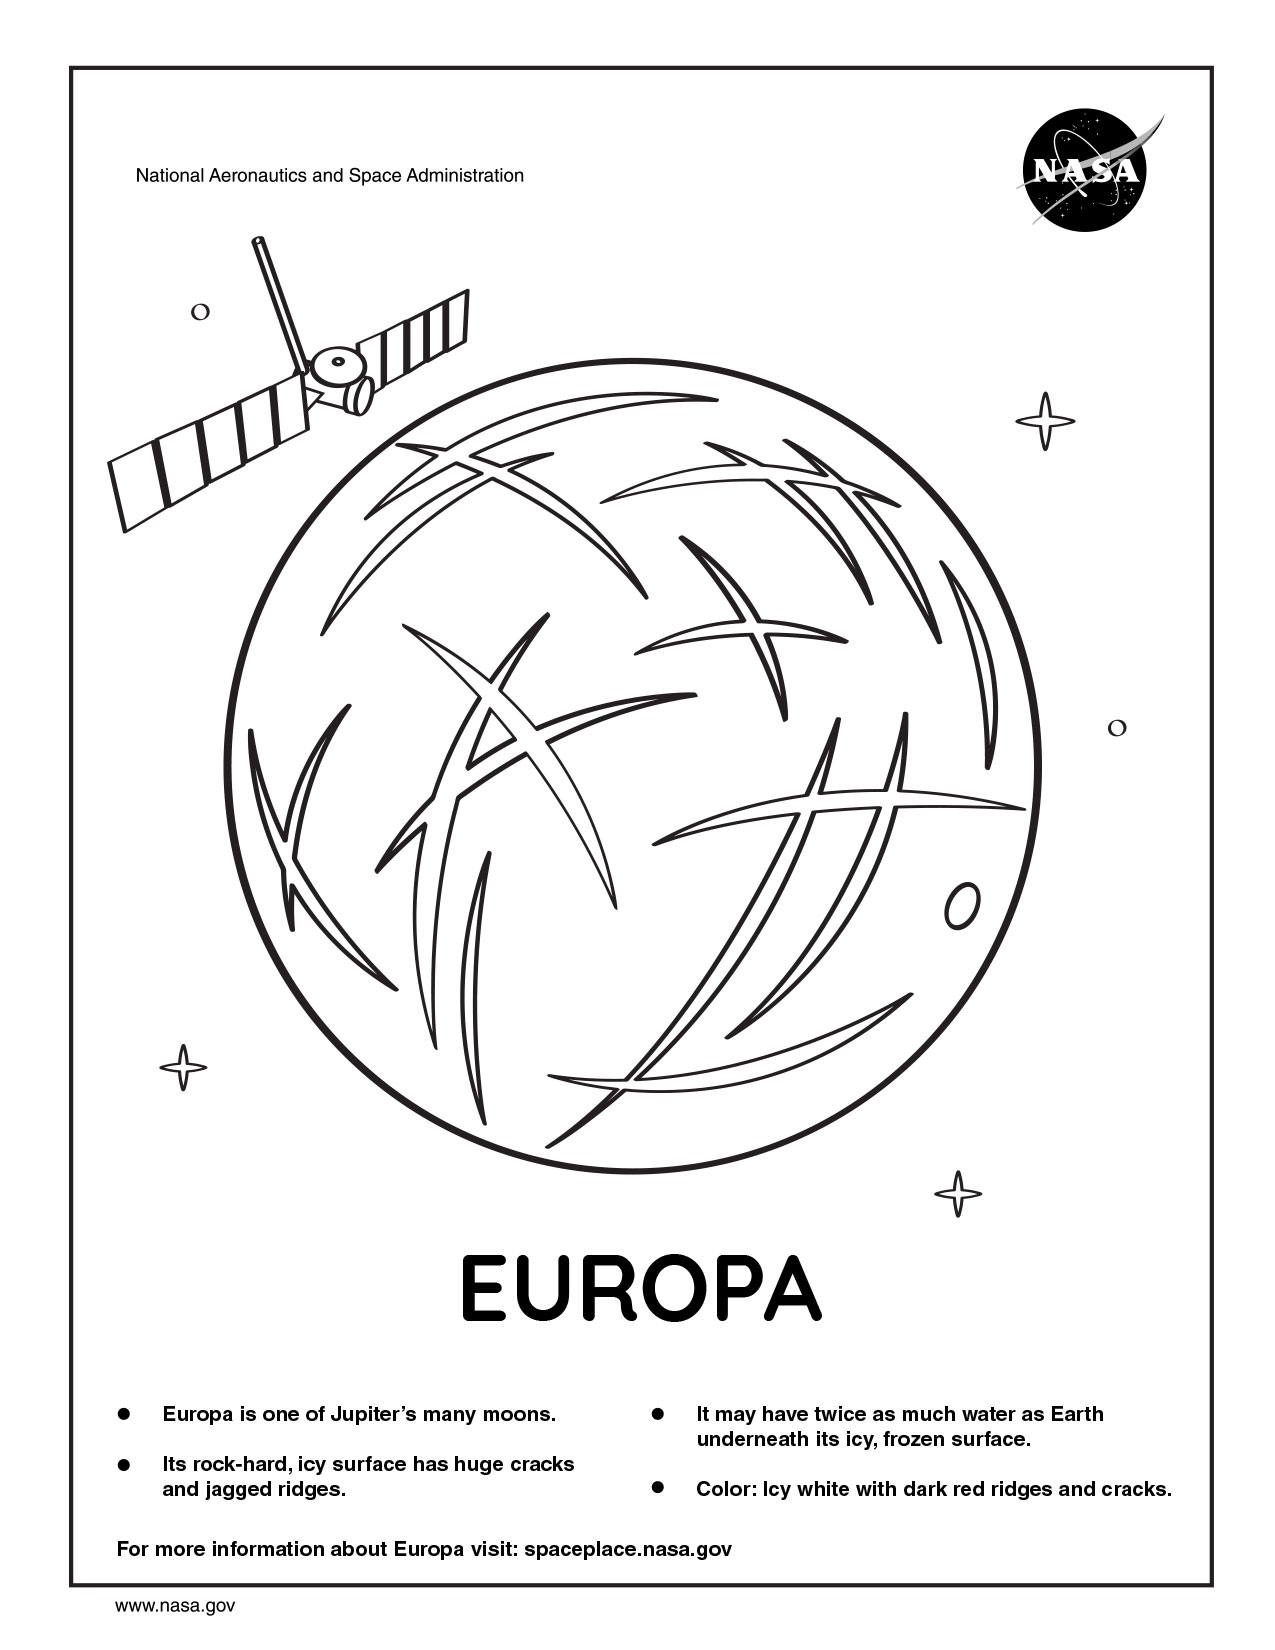 Coloring page for Europa.